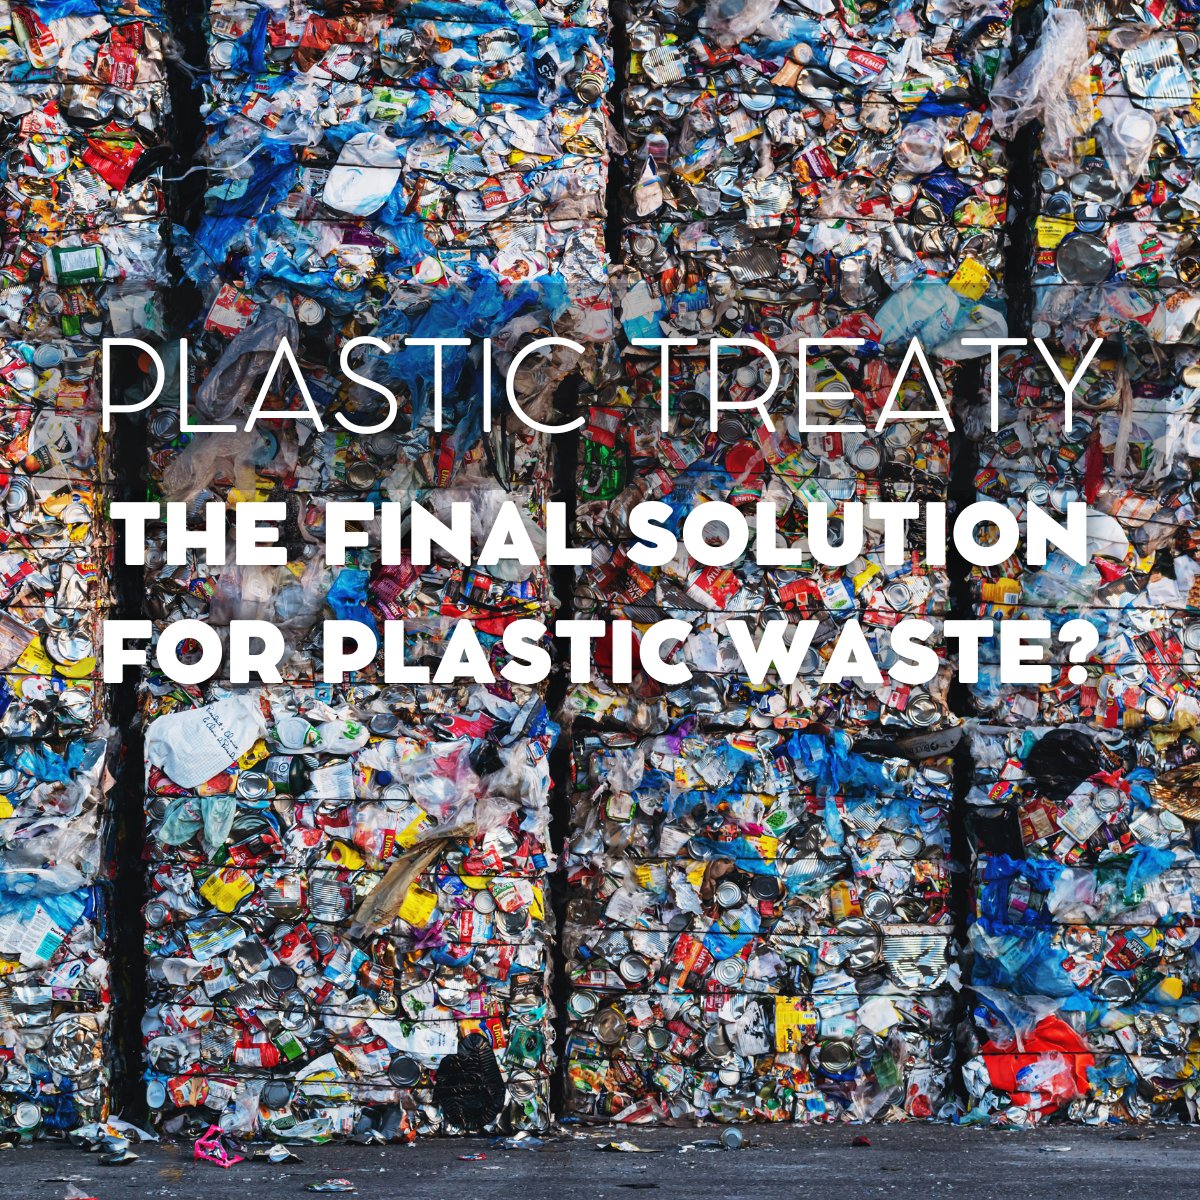 Last week, the UN Plastics Treaty advanced in Ottawa, Canada, aiming to create a binding global pact to combat #plasticpollution. The final negotiation round is set to conclude this year, with ratification expected by 2025. #plastictreaty #plastic  #plasticwaste #PRIMUSproject